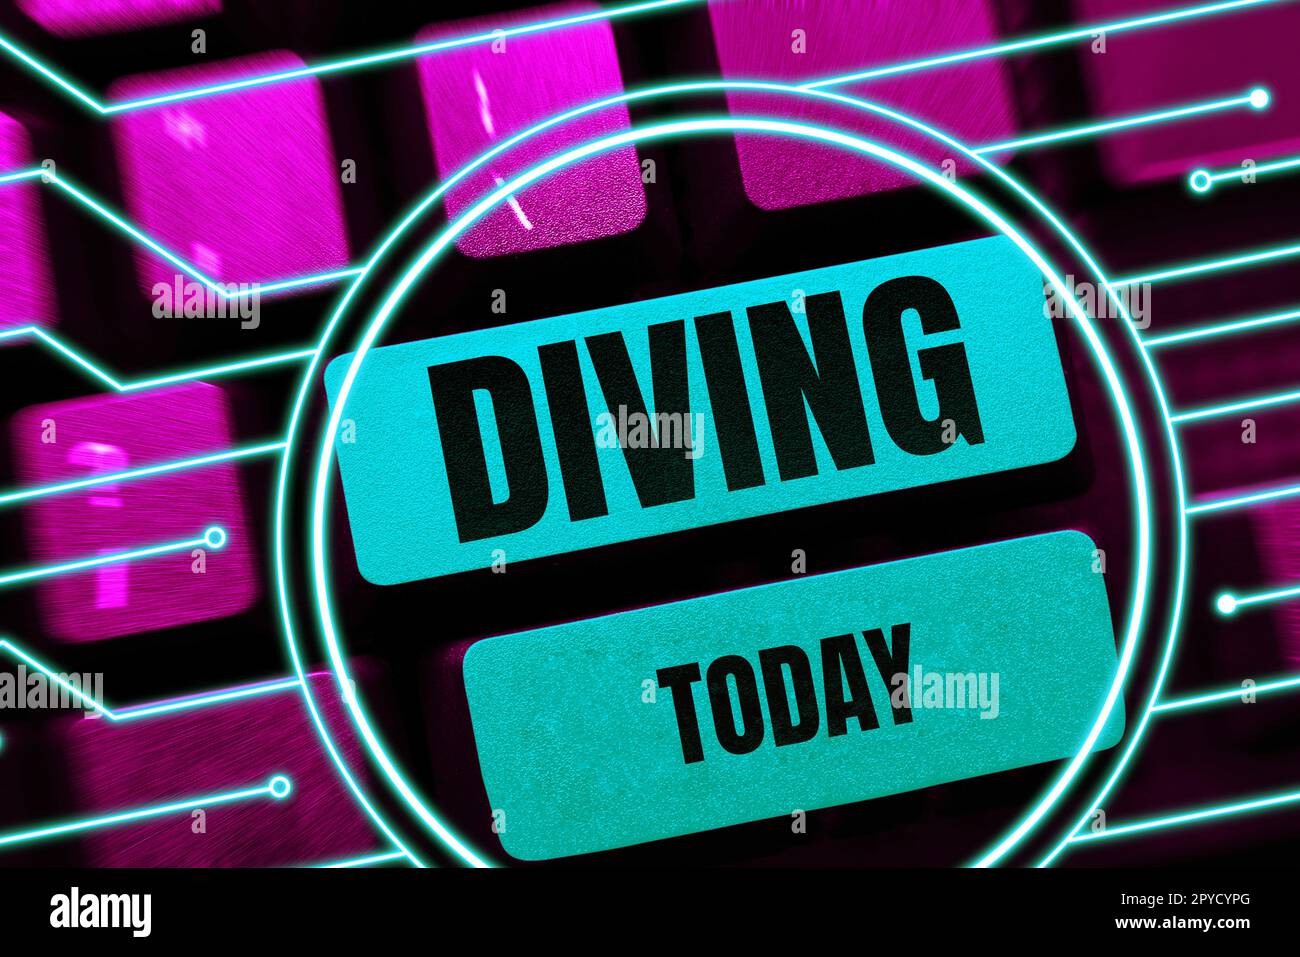 Text caption presenting Diving. Business approach sport or activity of swimming into water using oxygen and suit Stock Photo